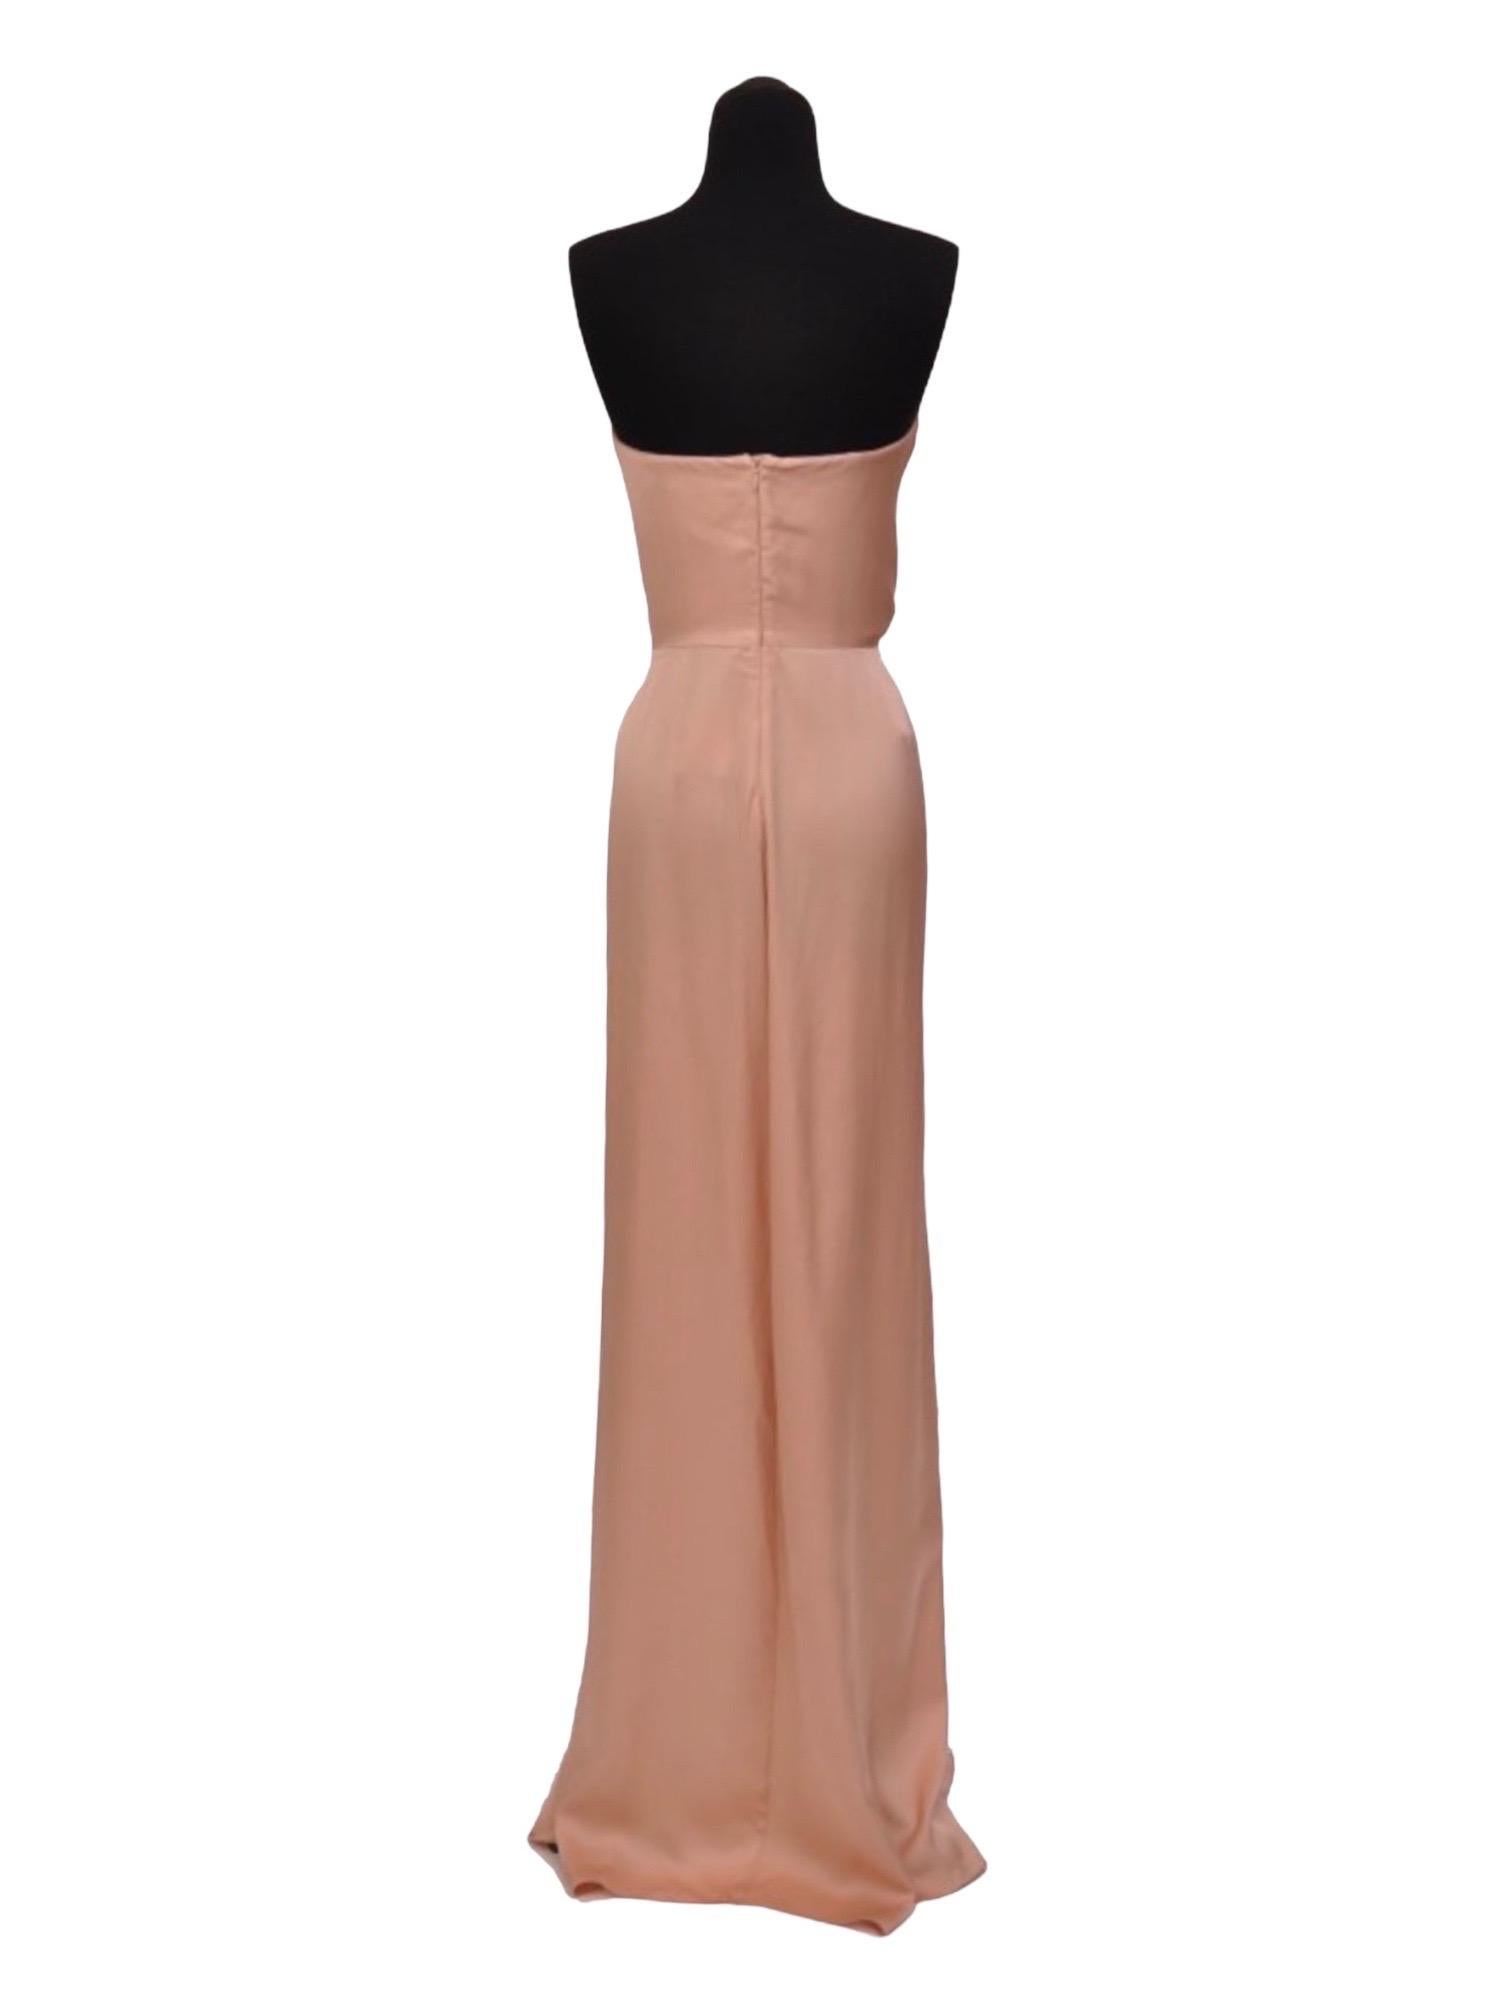 New Saint Laurent Edition Soir Strapless Crystal Embellished Nude Silk Dress 6 In New Condition For Sale In Montgomery, TX